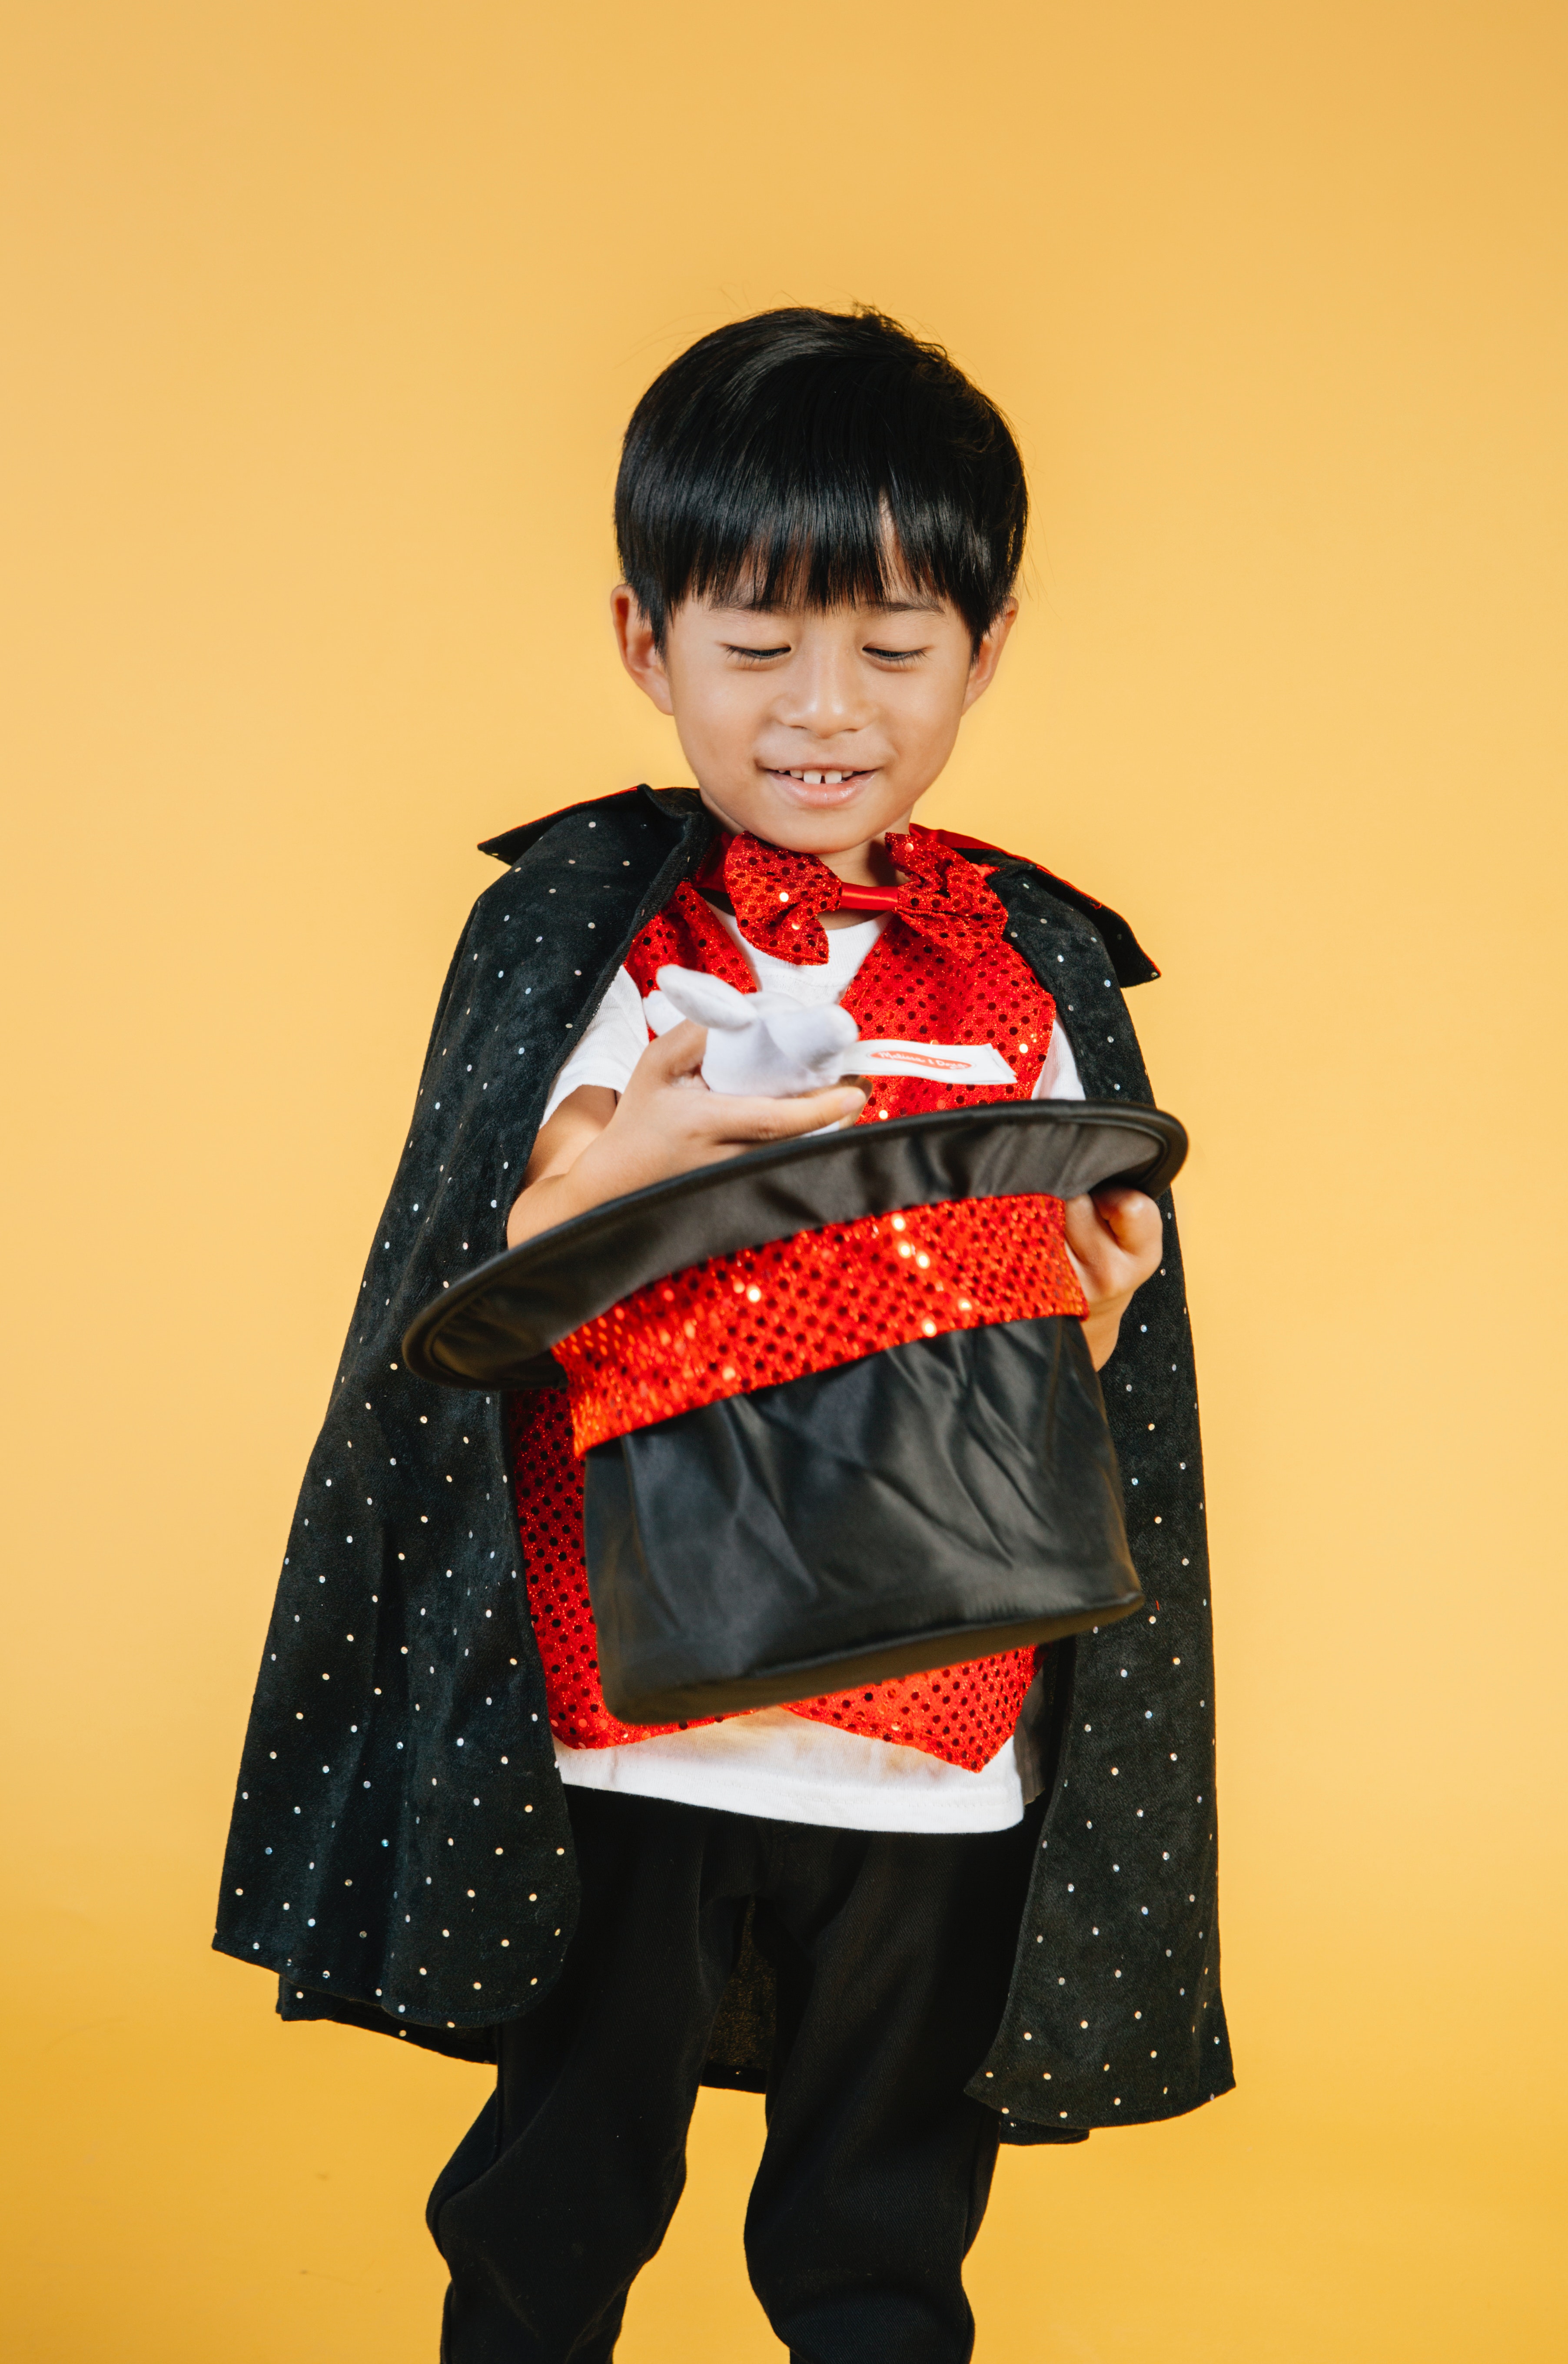 Photo by Amina Filkins from Pexels: https://www.pexels.com/photo/happy-little-asian-boy-in-magician-costume-doing-trick-5560049/